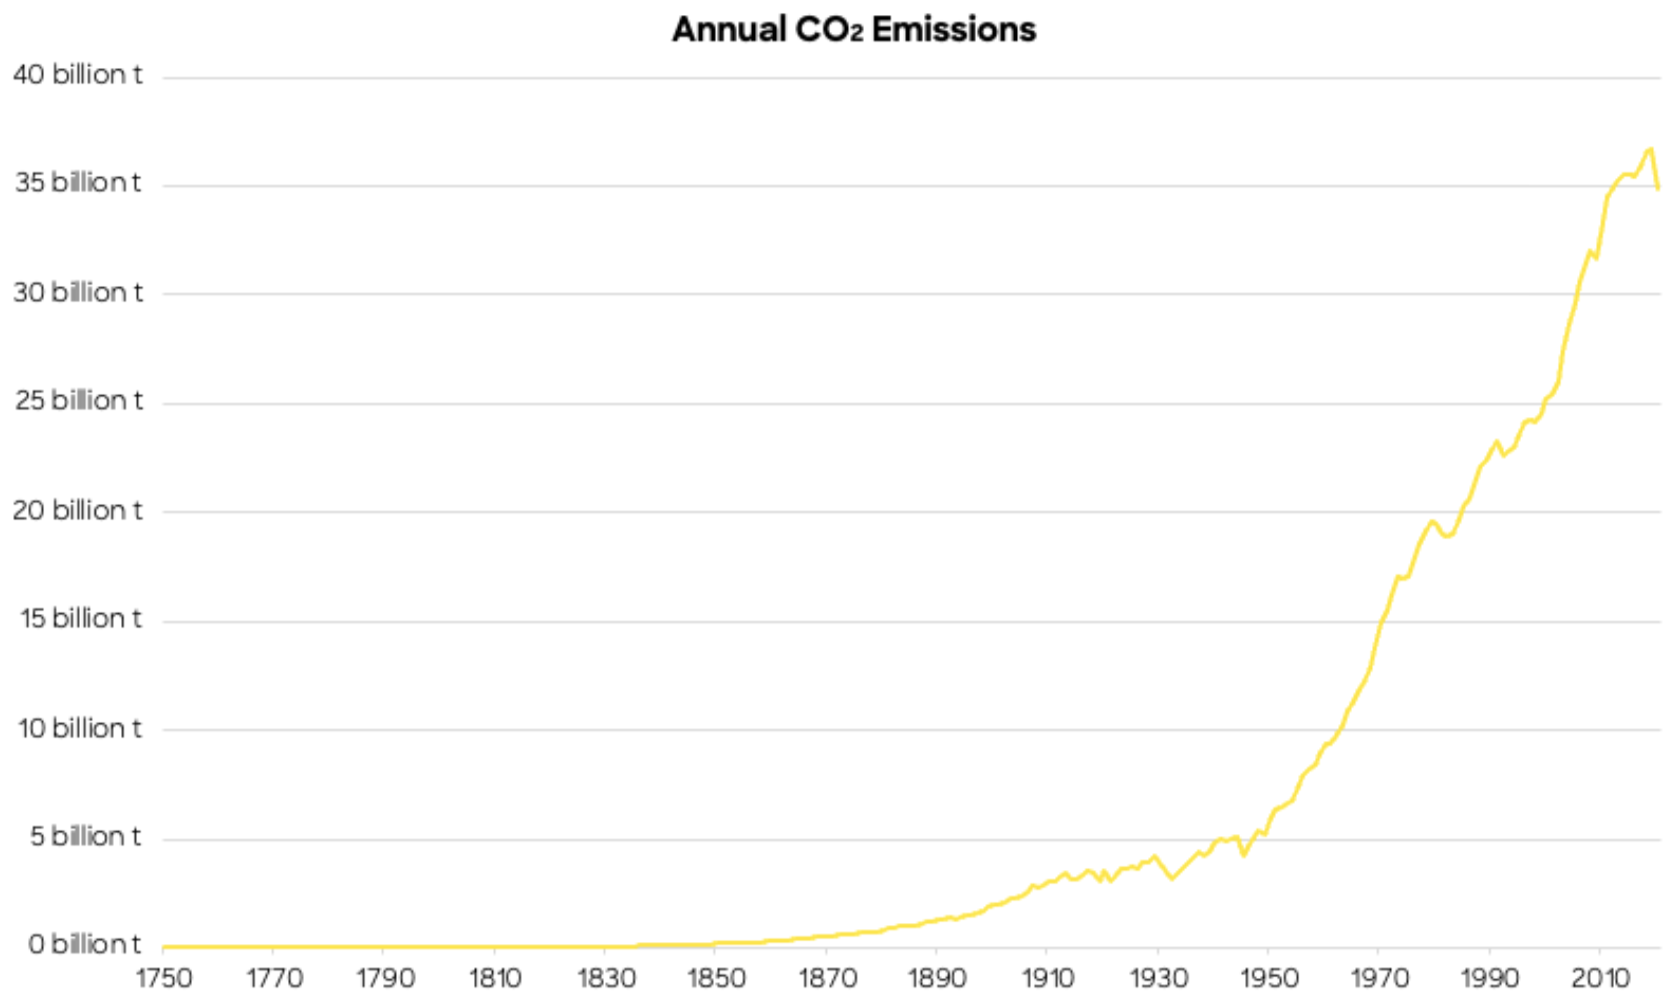 Global CO2 emissions: Carbon dioxide emissions from the burning of fossil fuels for energy and cement production. Land use change is not included.